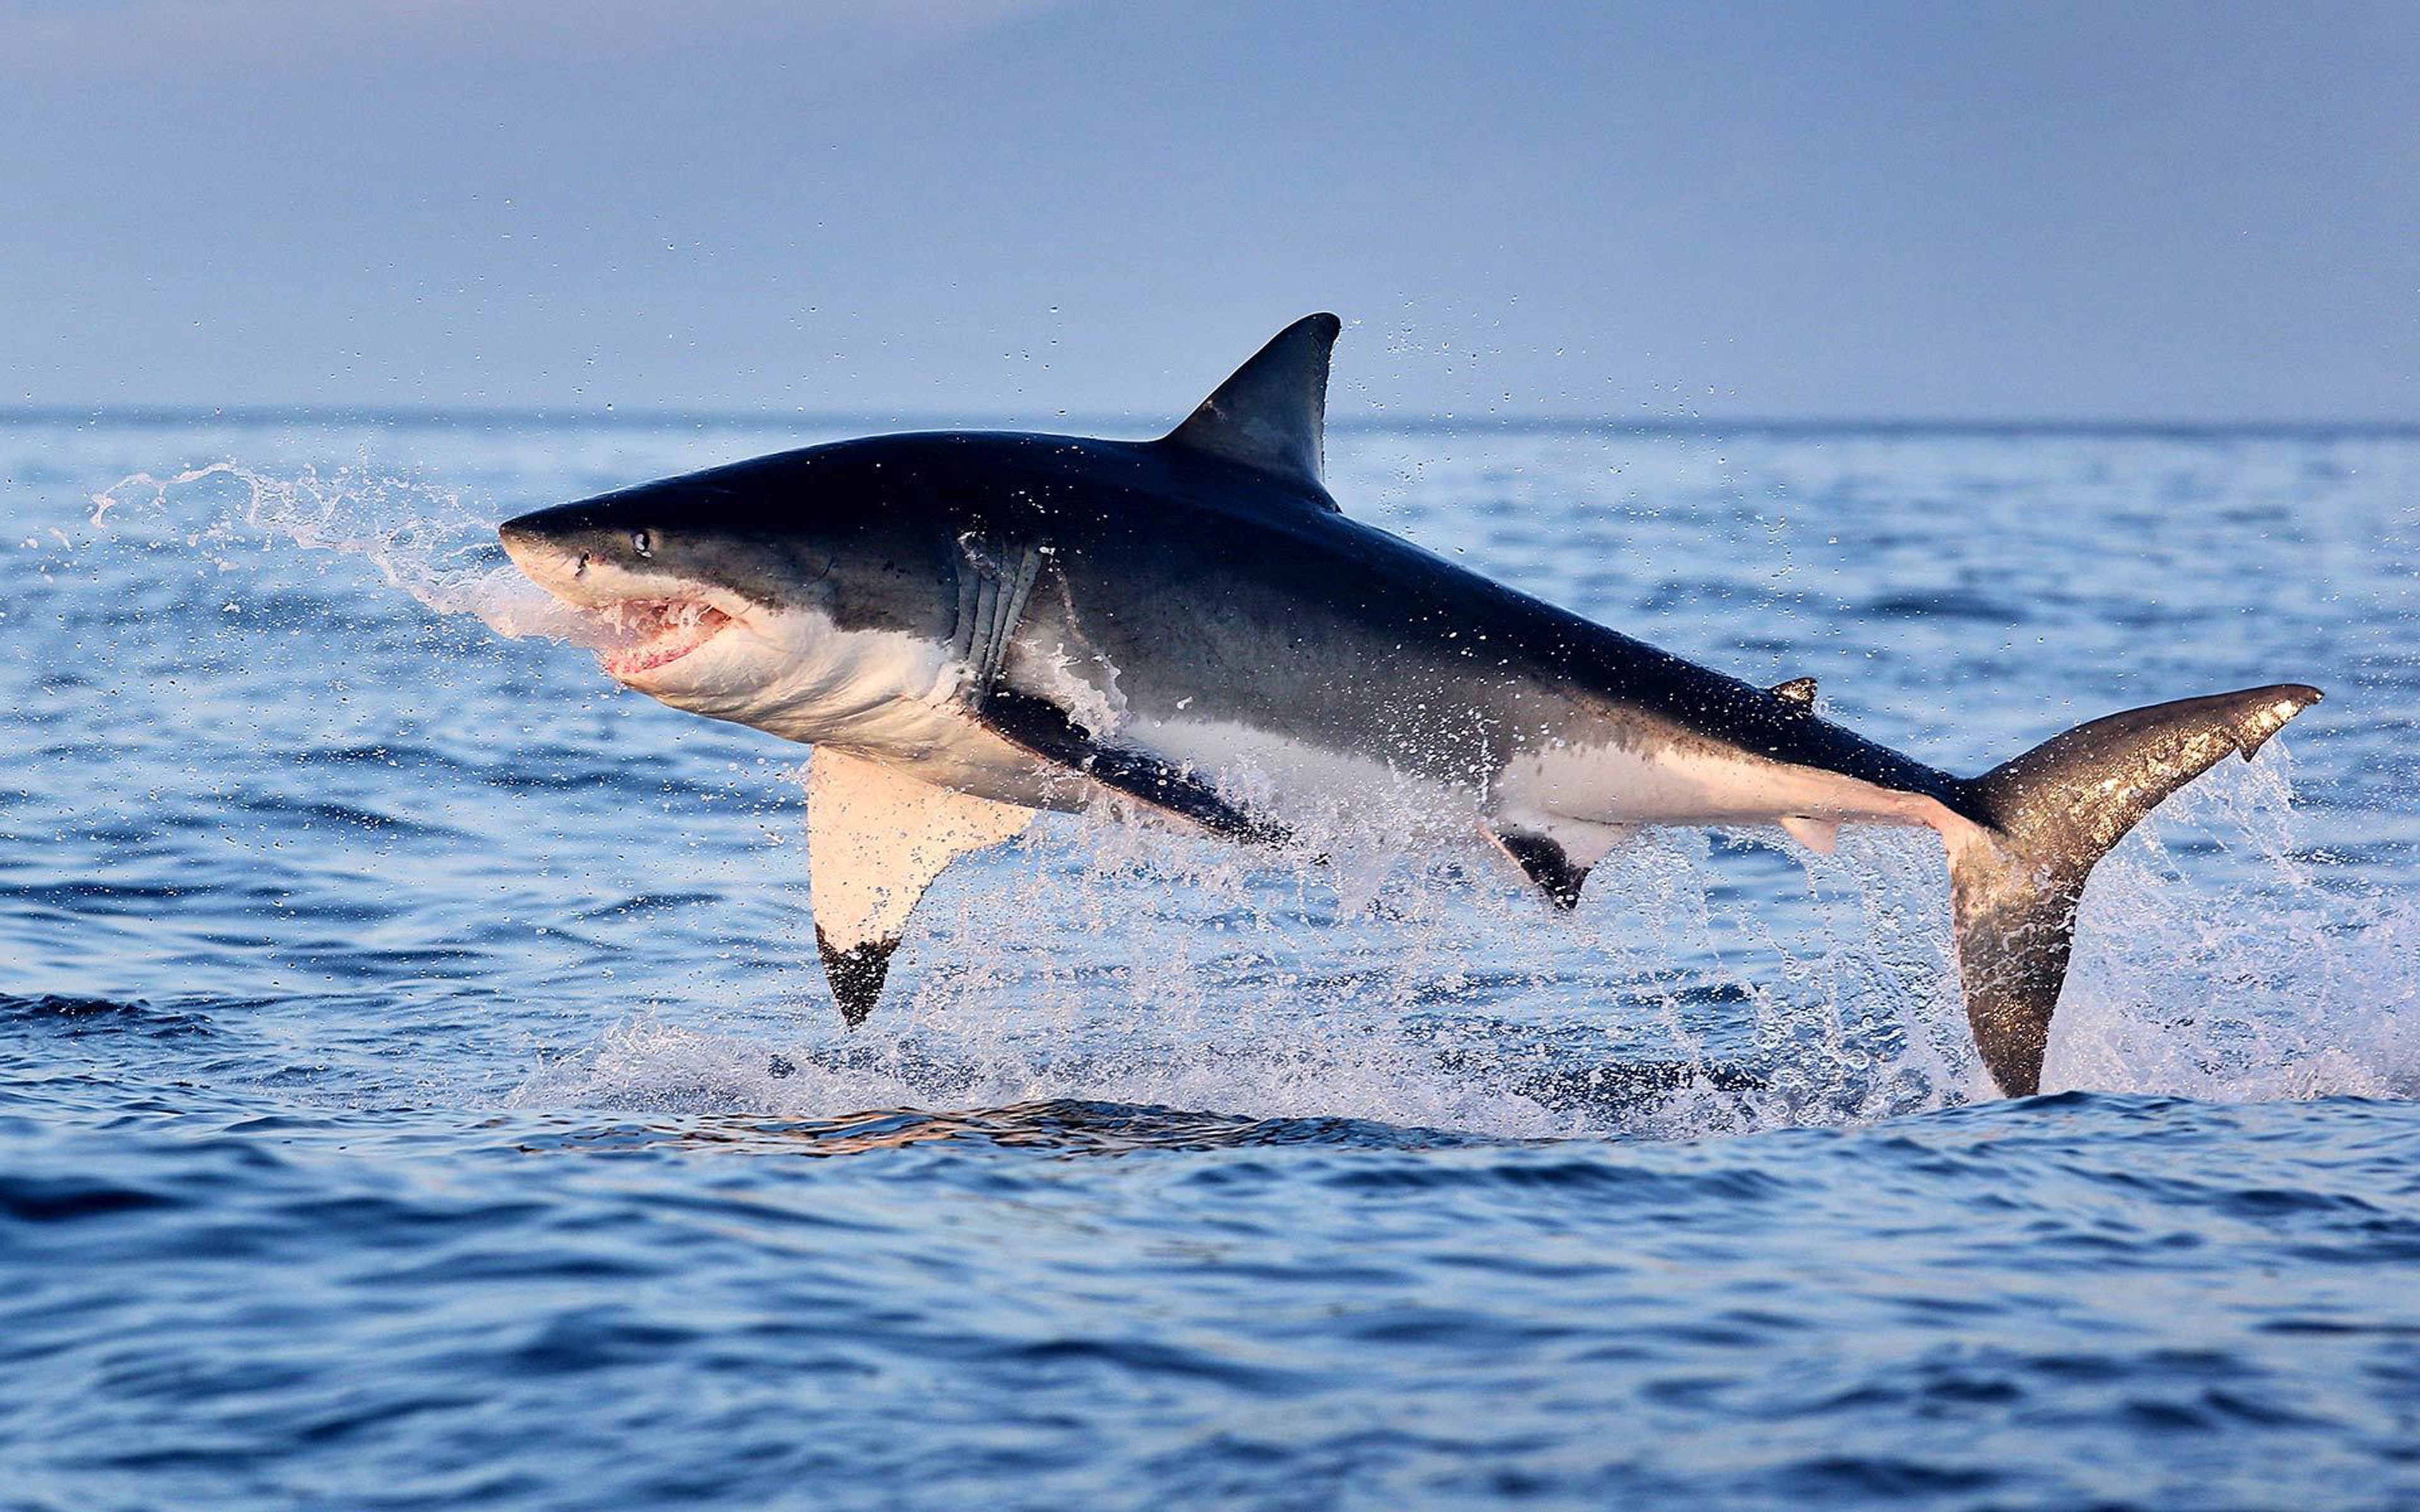 Great White Shark Jumping Out Of Water Hd Wallpapers : Wallpapers13.